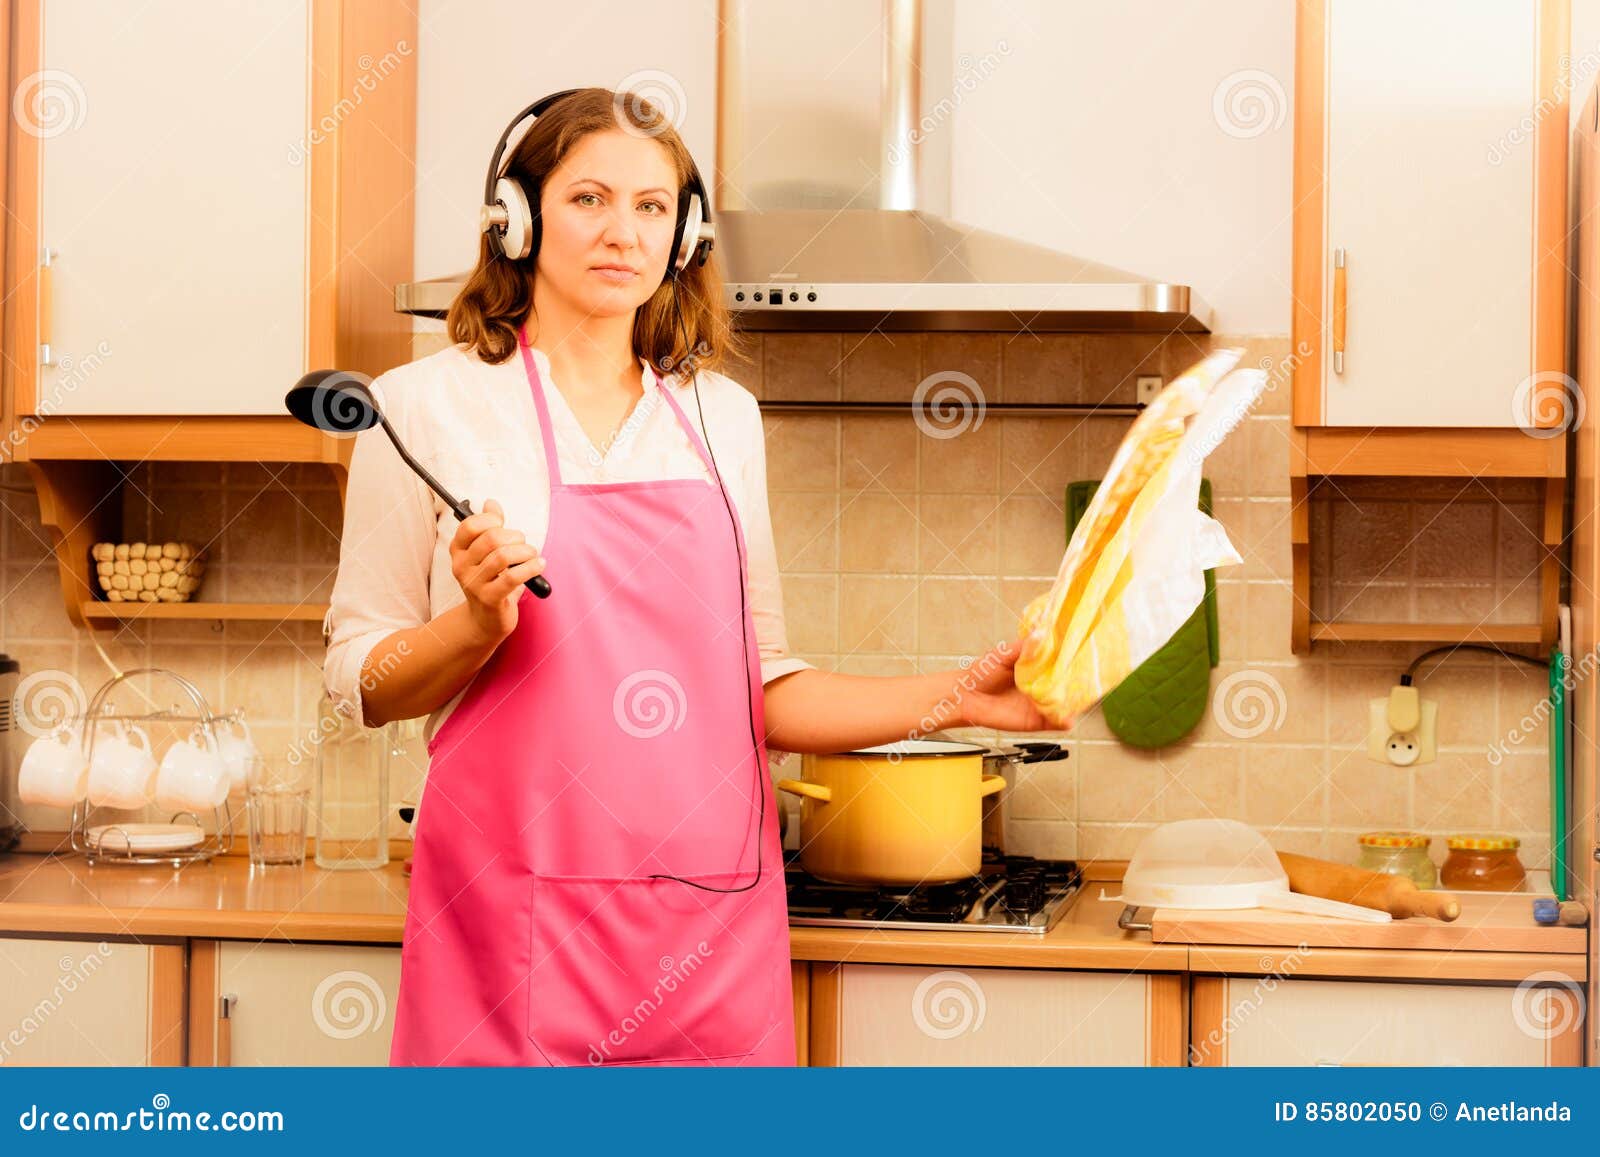 Housewife Cook In Kitchen Stock Photo Image Of Listening 85802050